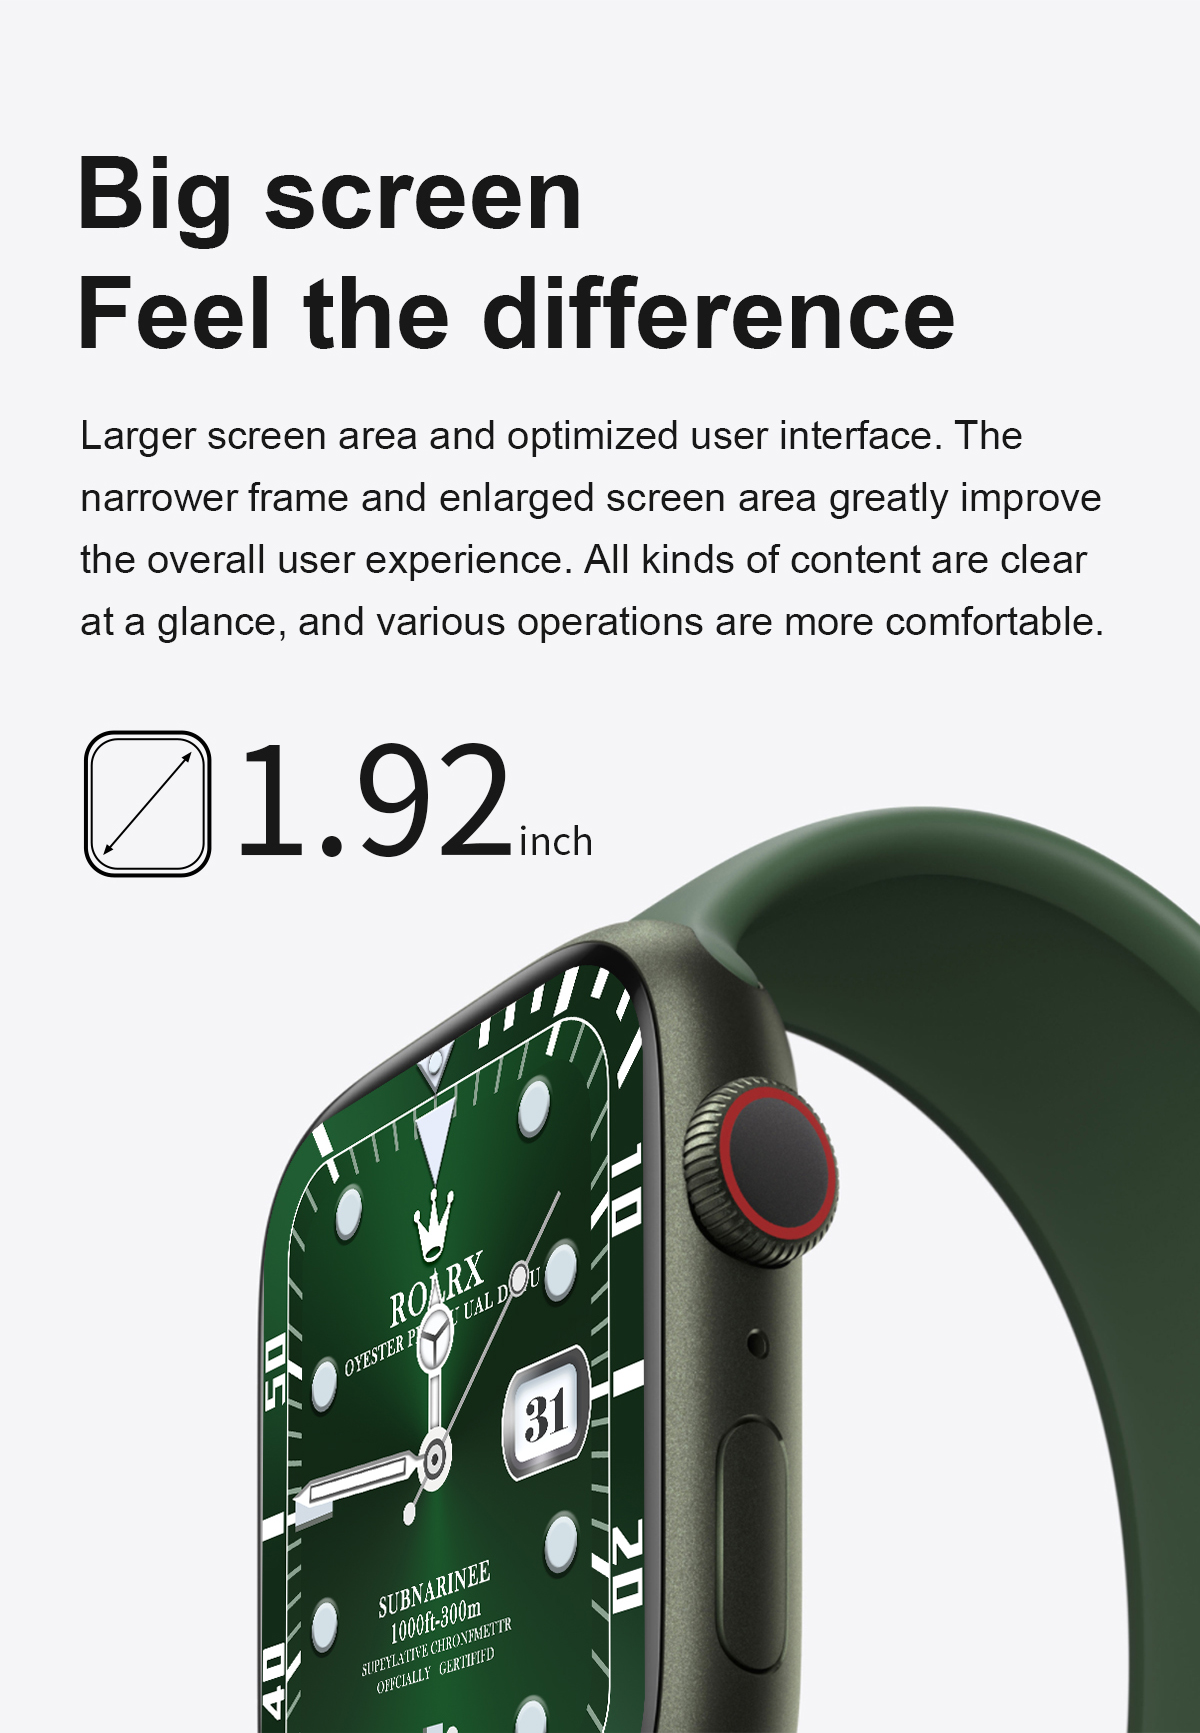 Smart Watch H7 - 1.92 inch screen size - waterproof - Bluetooth 5.1 - Wireless charging - Standby up to 10 days - Green color 